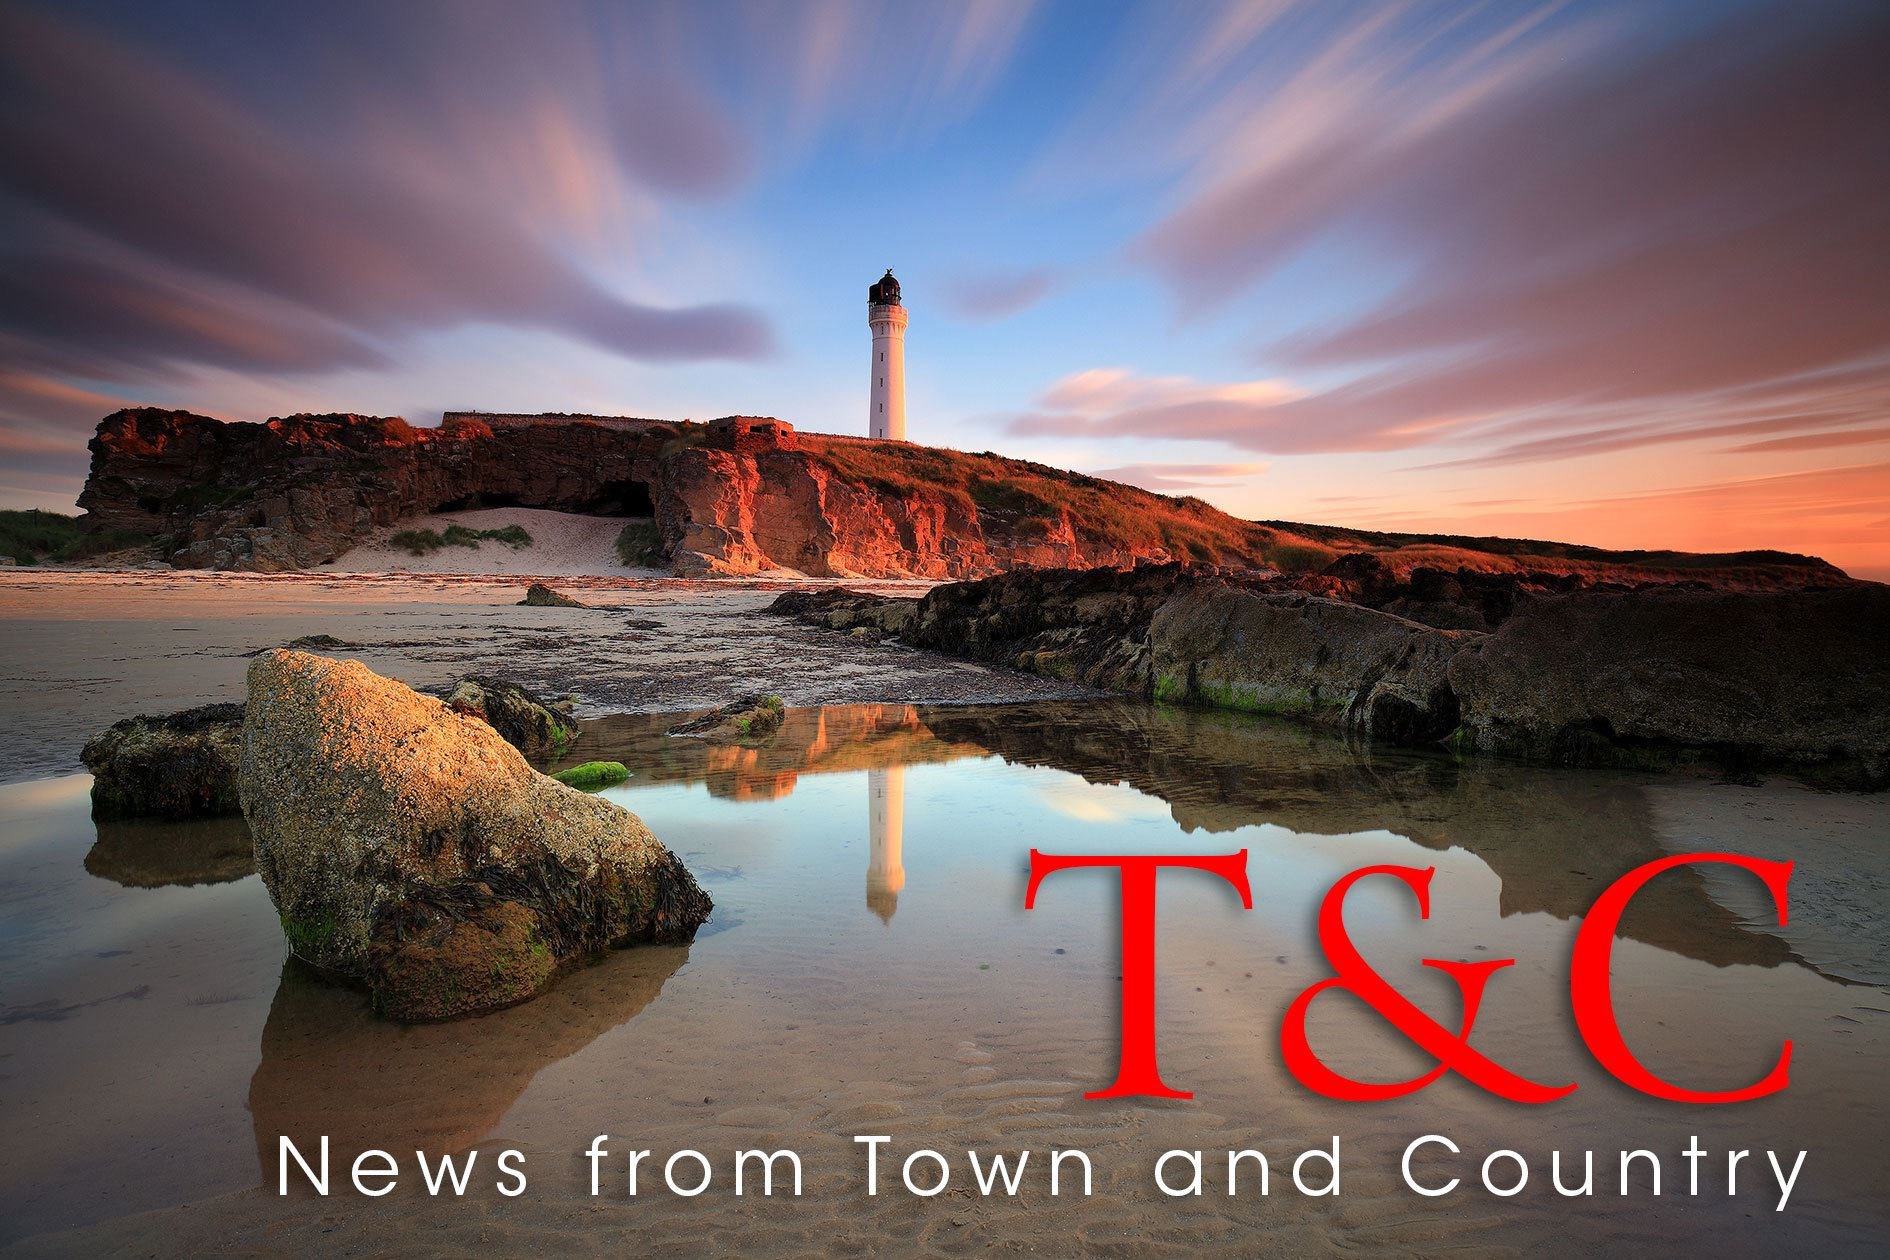 Send your town and country news into newsdesk@northern-scot.co.uk.